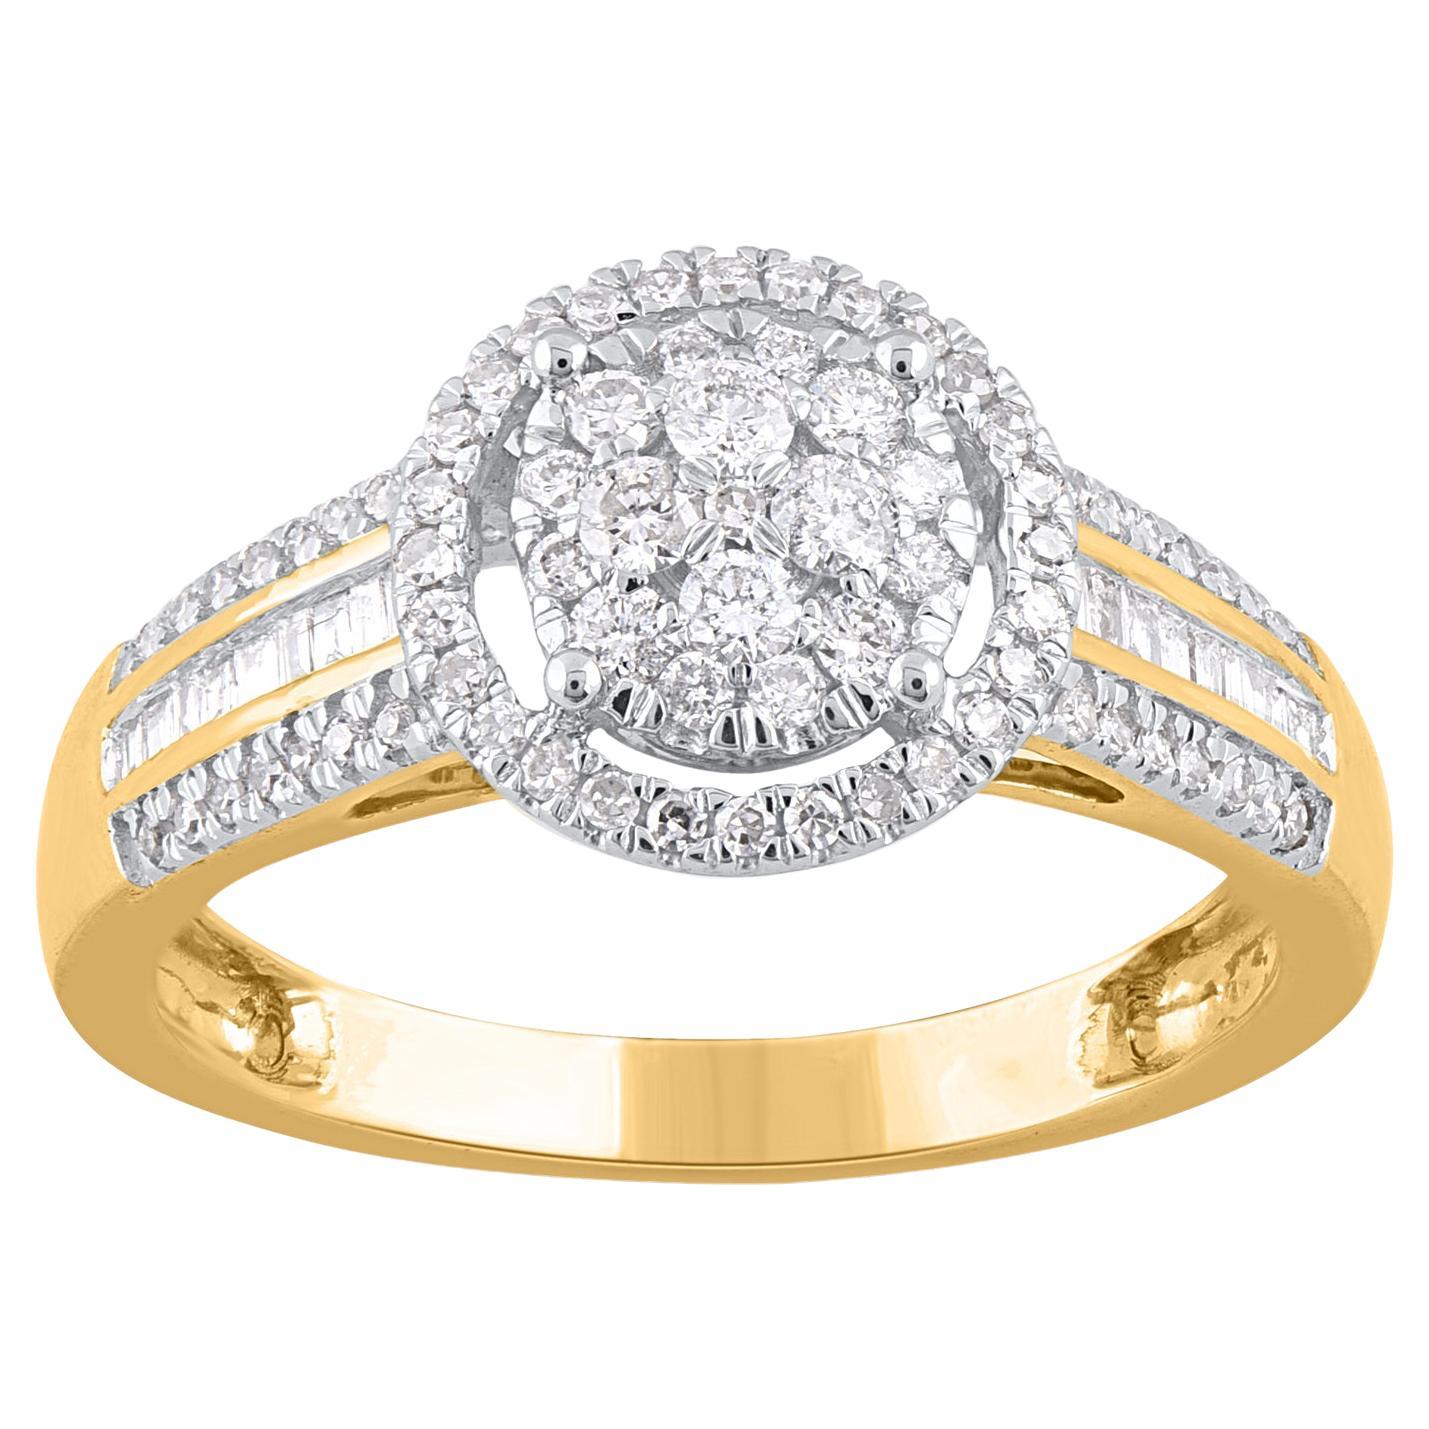 TJD 0.50 Carat Baguette & Round Diamond 14KT Yellow Gold Halo Engagement Ring